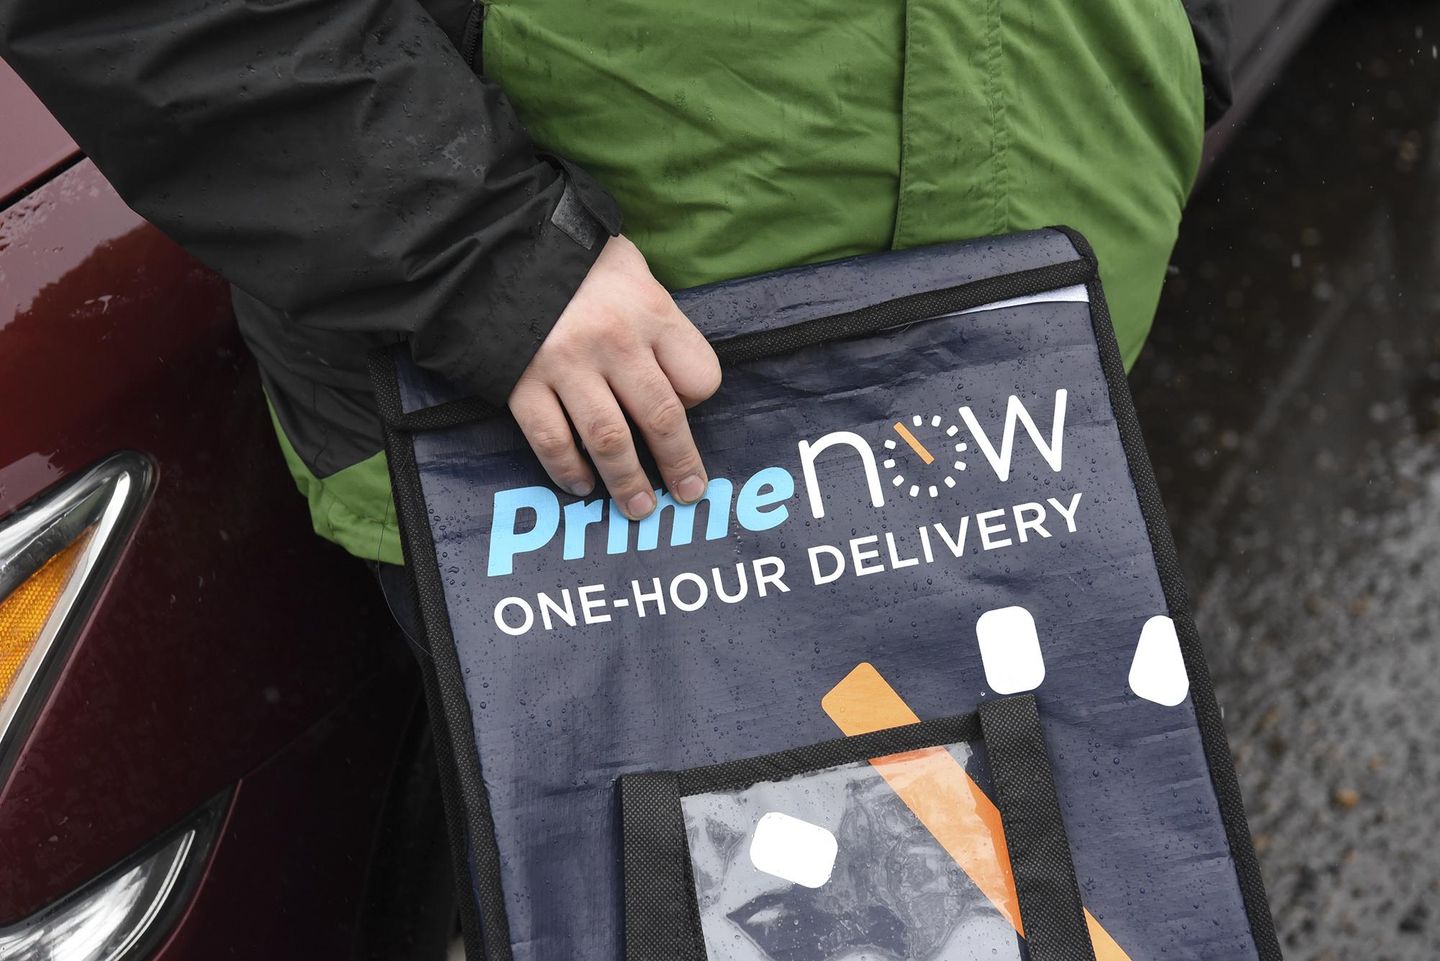 Amazon again accused of withholding tips from its delivery drivers in D.C. attorney general lawsuit